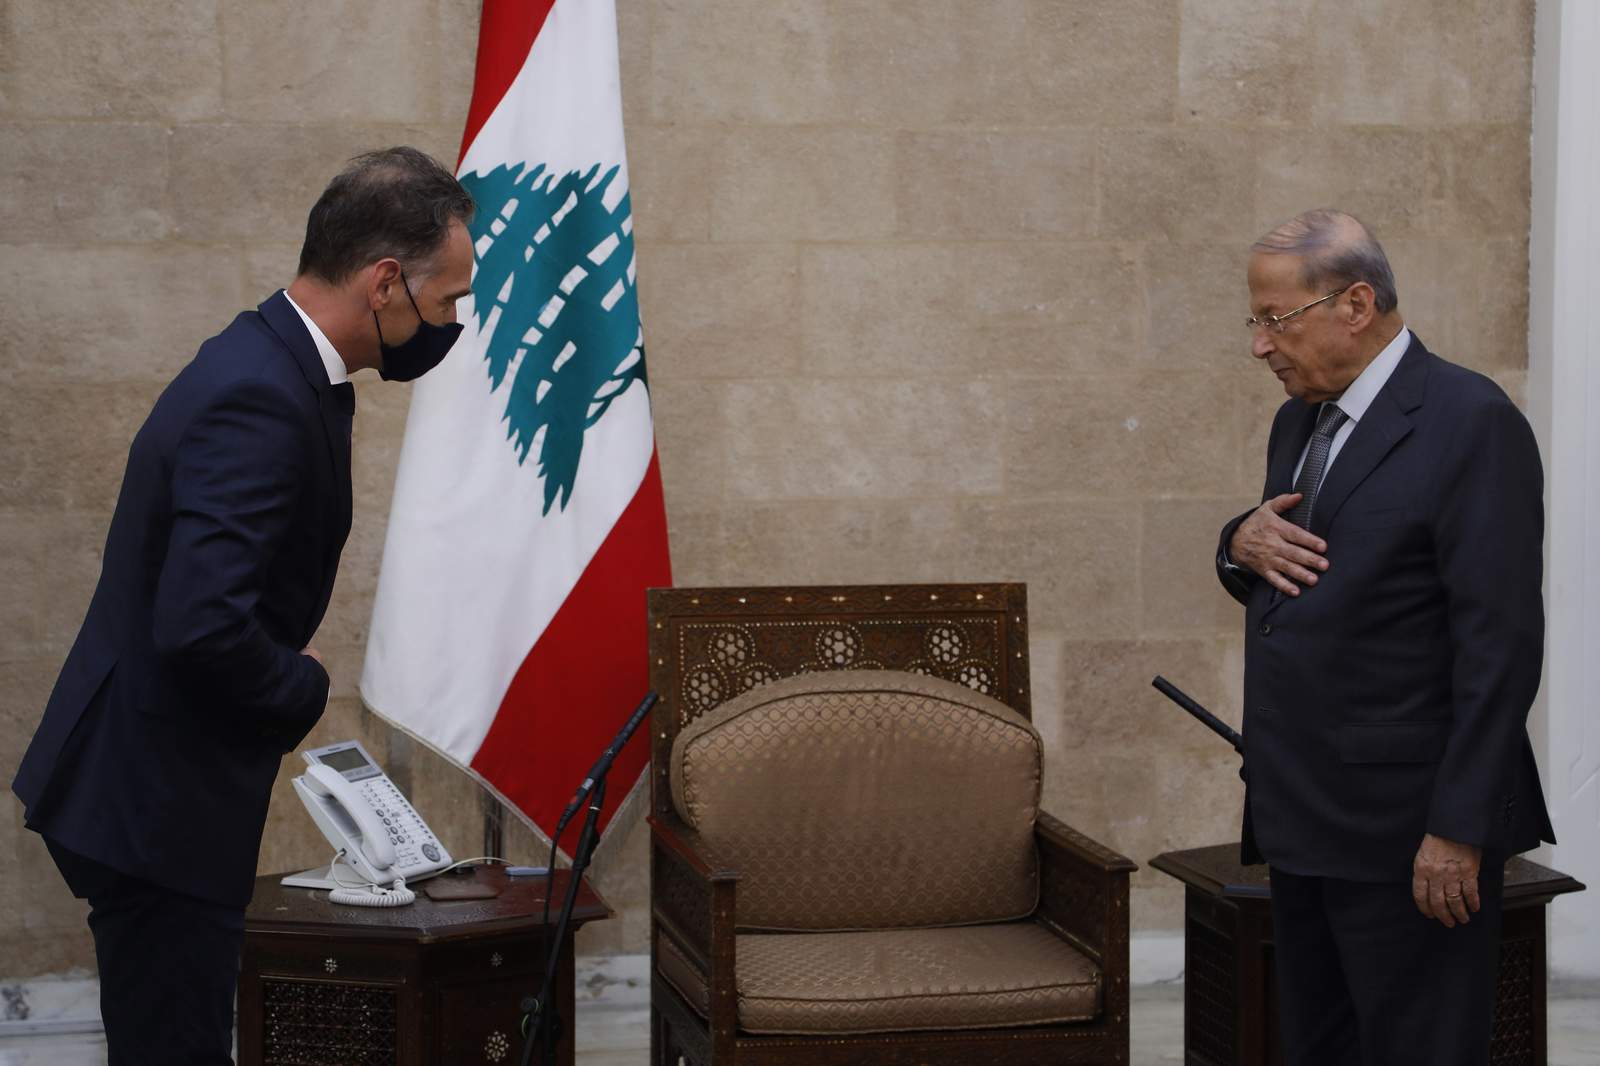 FM says Germany ready to help Lebanon but reforms necessary